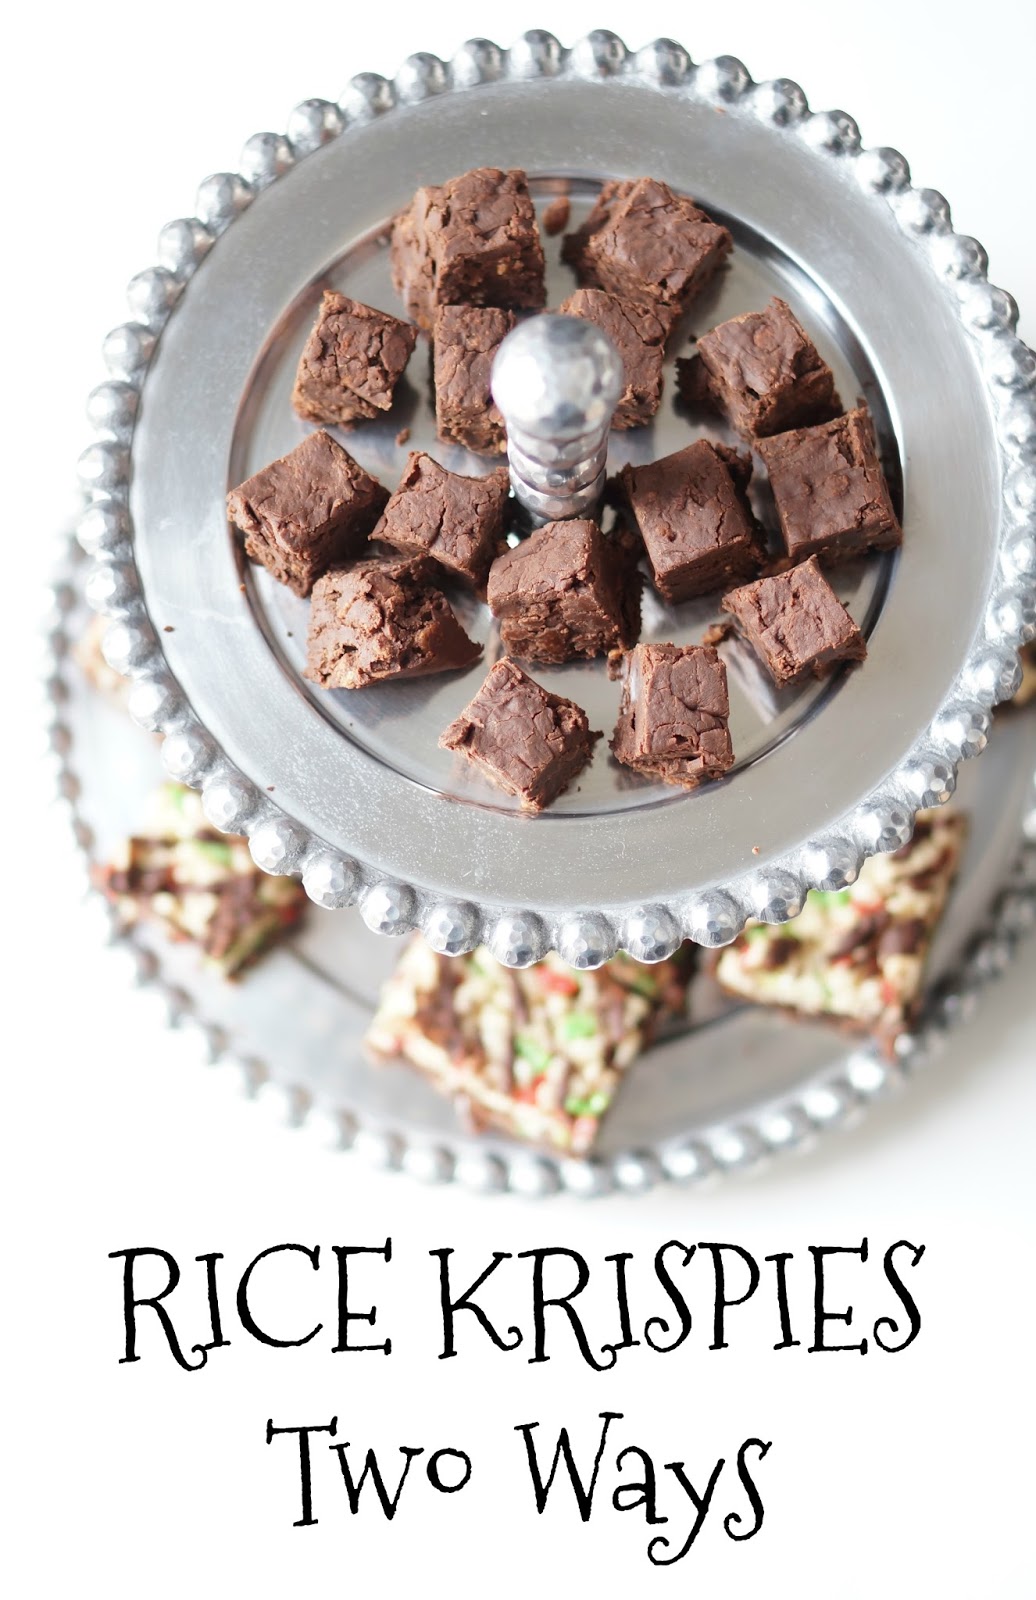 Rebecca Lately Kellogg's Rice Krispies for the Holidays Rice Krispies Brownies Double Cocoa Fudge